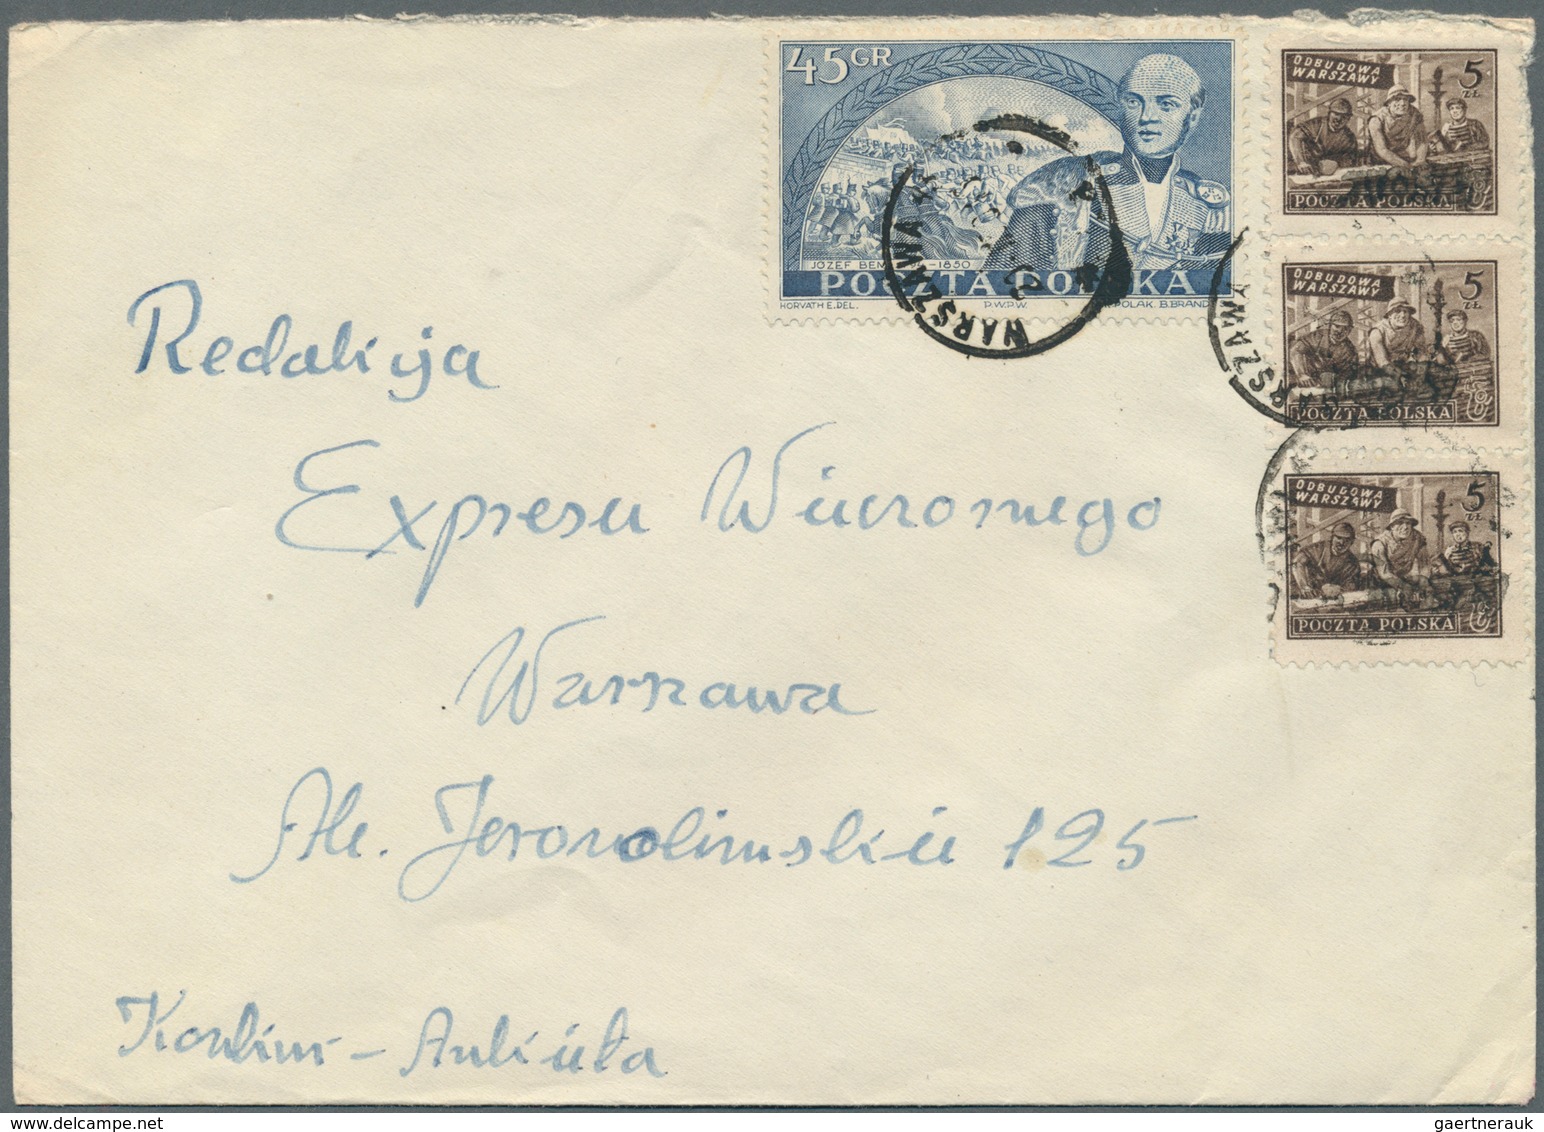 Polen: 1950/1951, GROSZY OVERPRINTS: very comprehensive collection of more than 250 covers from the